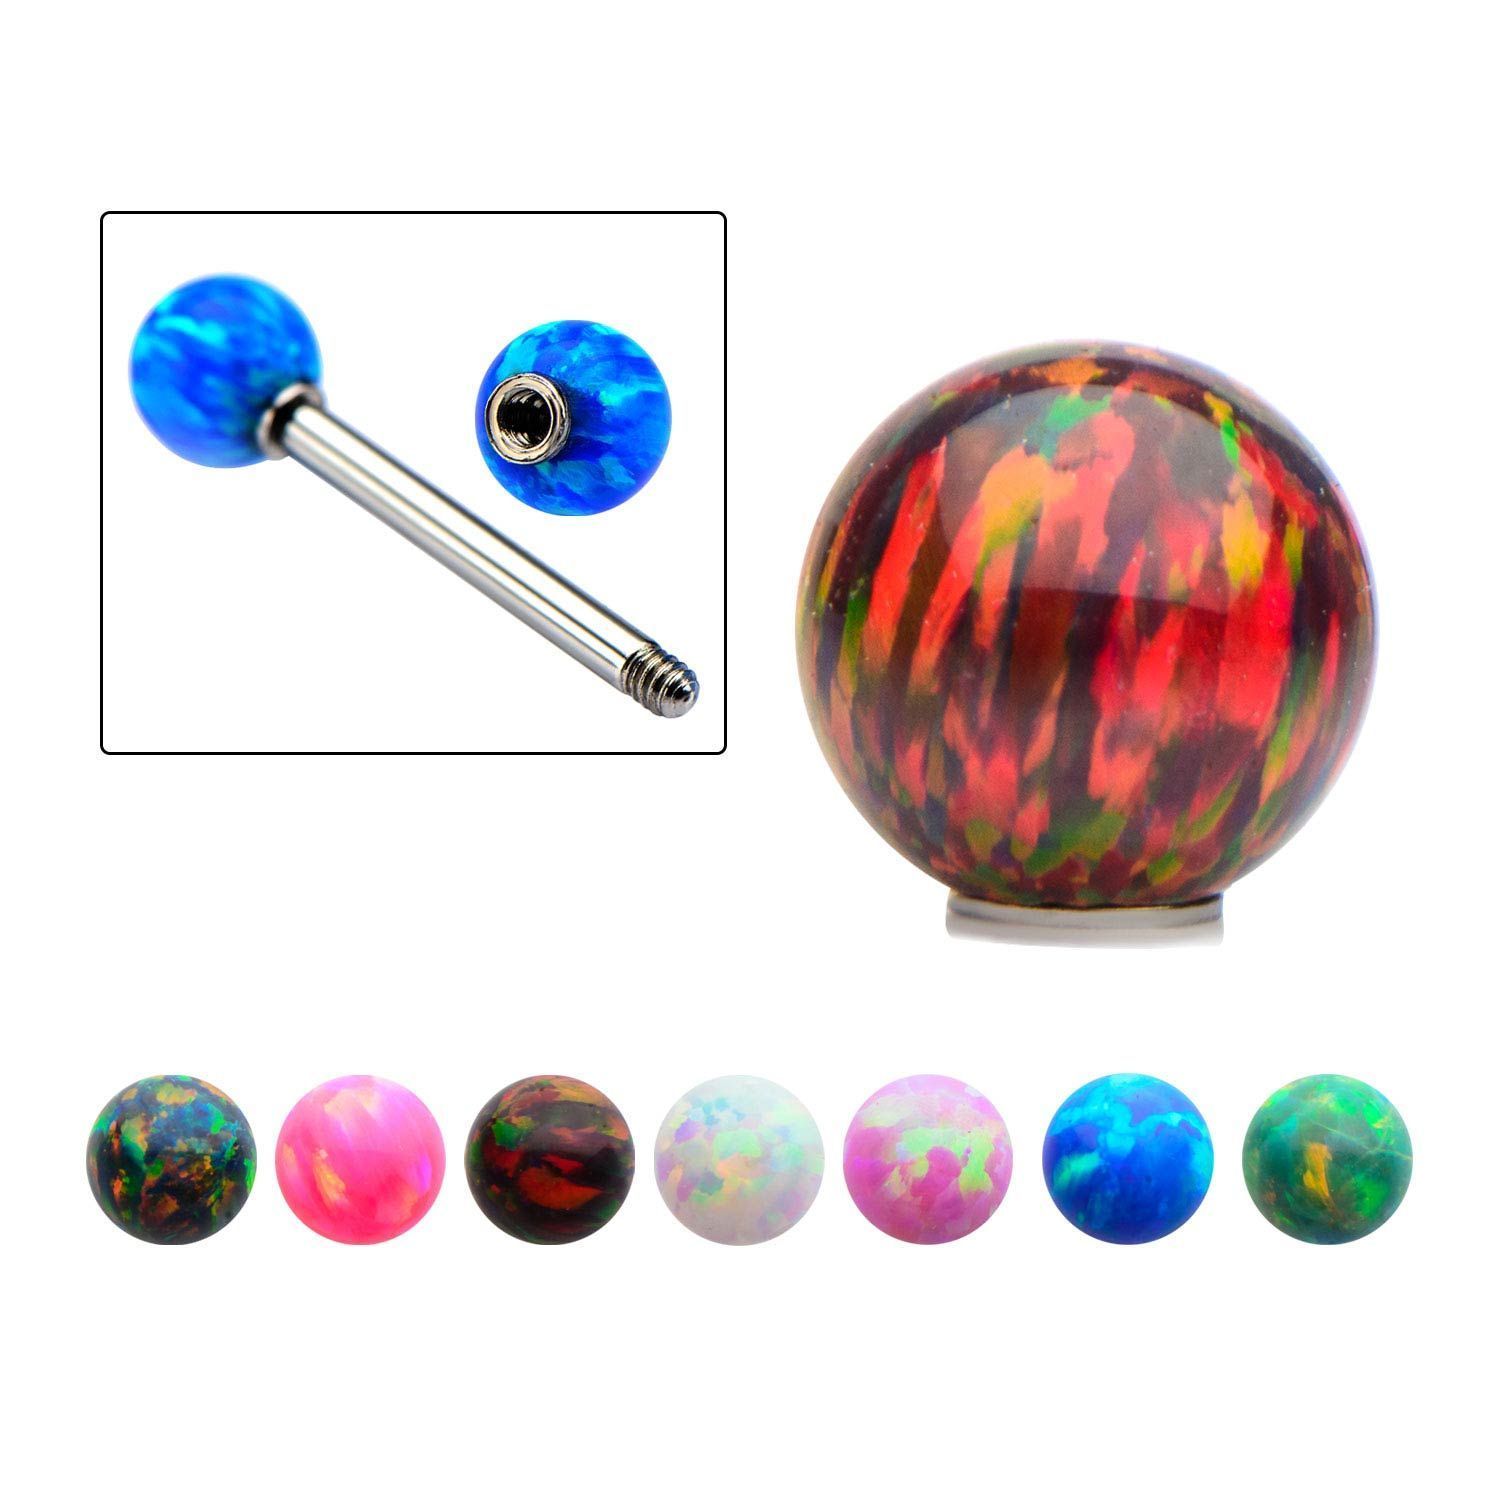 Body Jewelry Parts Synthetic Opal Replacement Threaded Ball. sbvtb35op -Rebel Bod-RebelBod